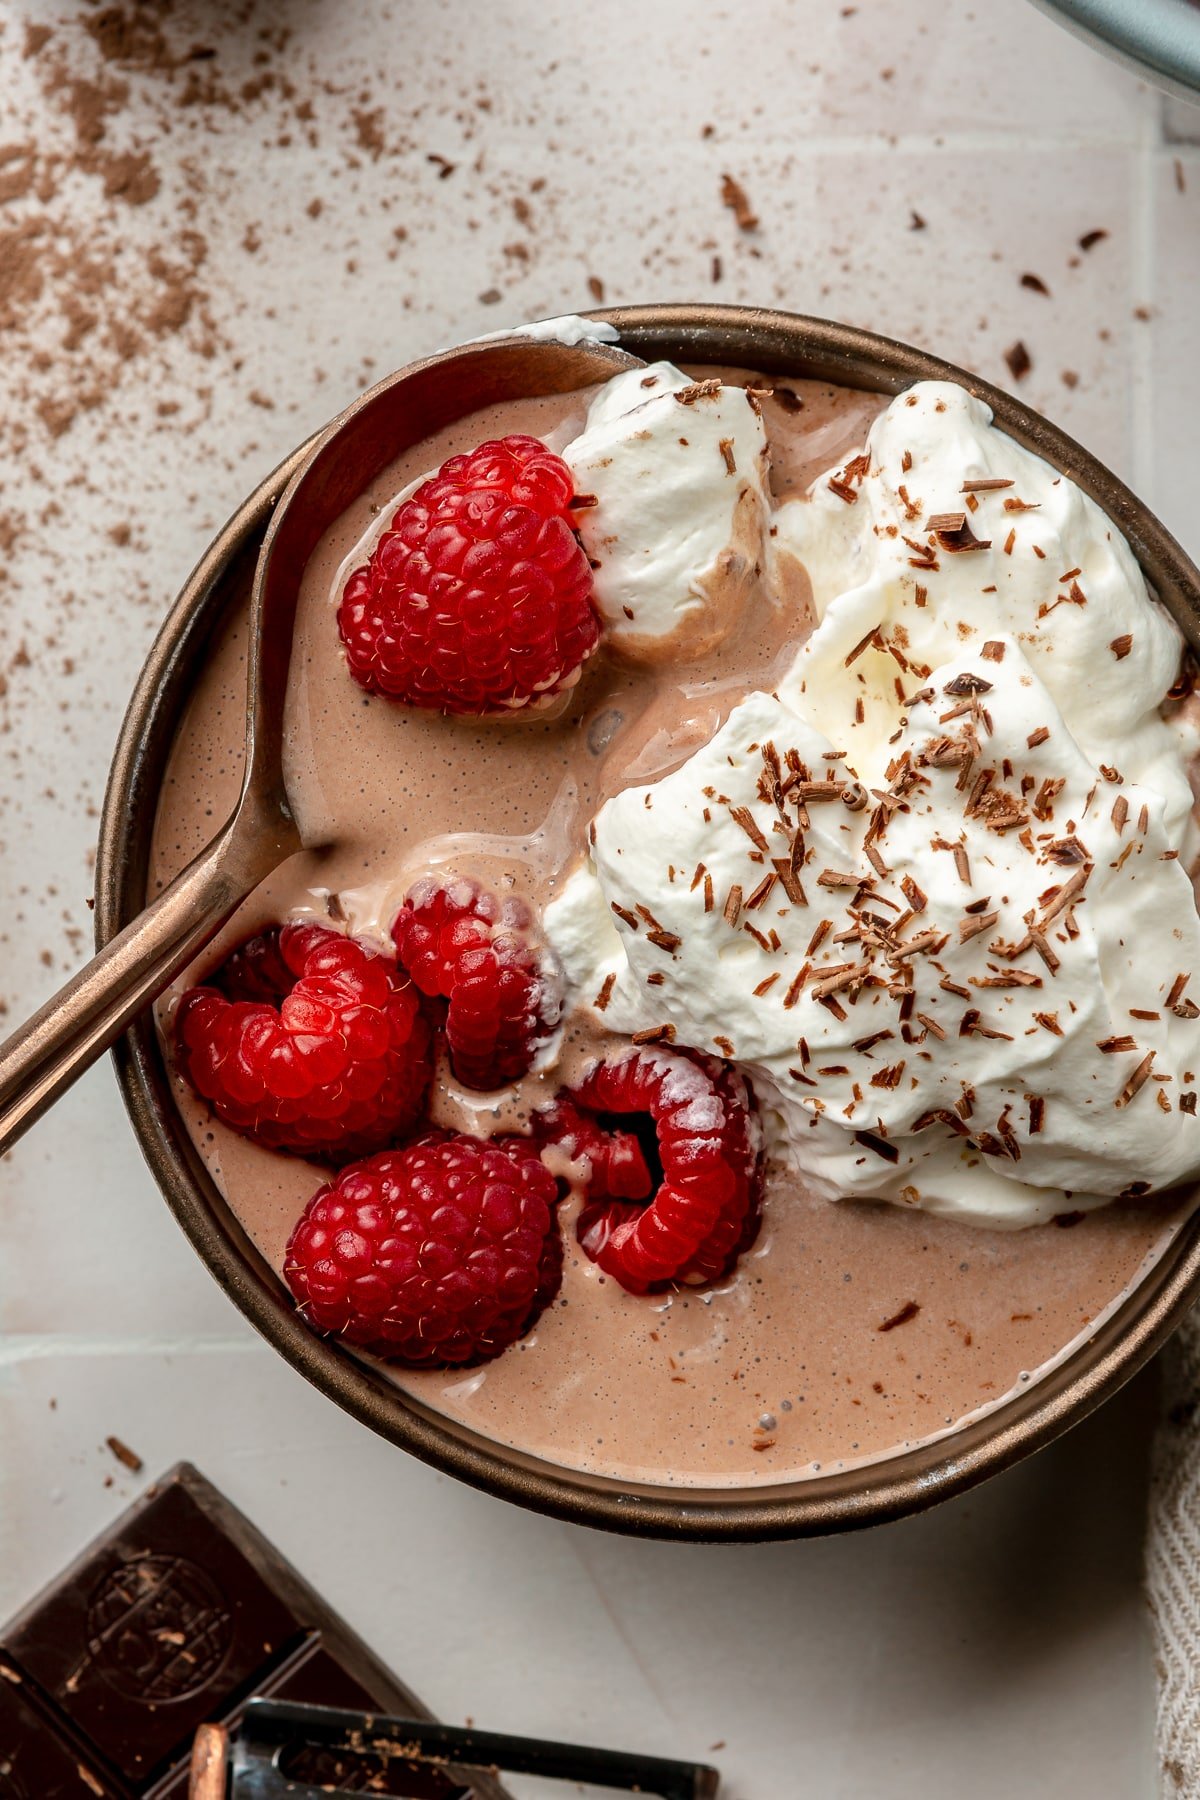 A bowl of chocolate protein pudding sits on a white tiled countertop. It has been topped with raspberries, whipped cream, and chocolate shavings. A copper colored spoon is shown scooping bite.